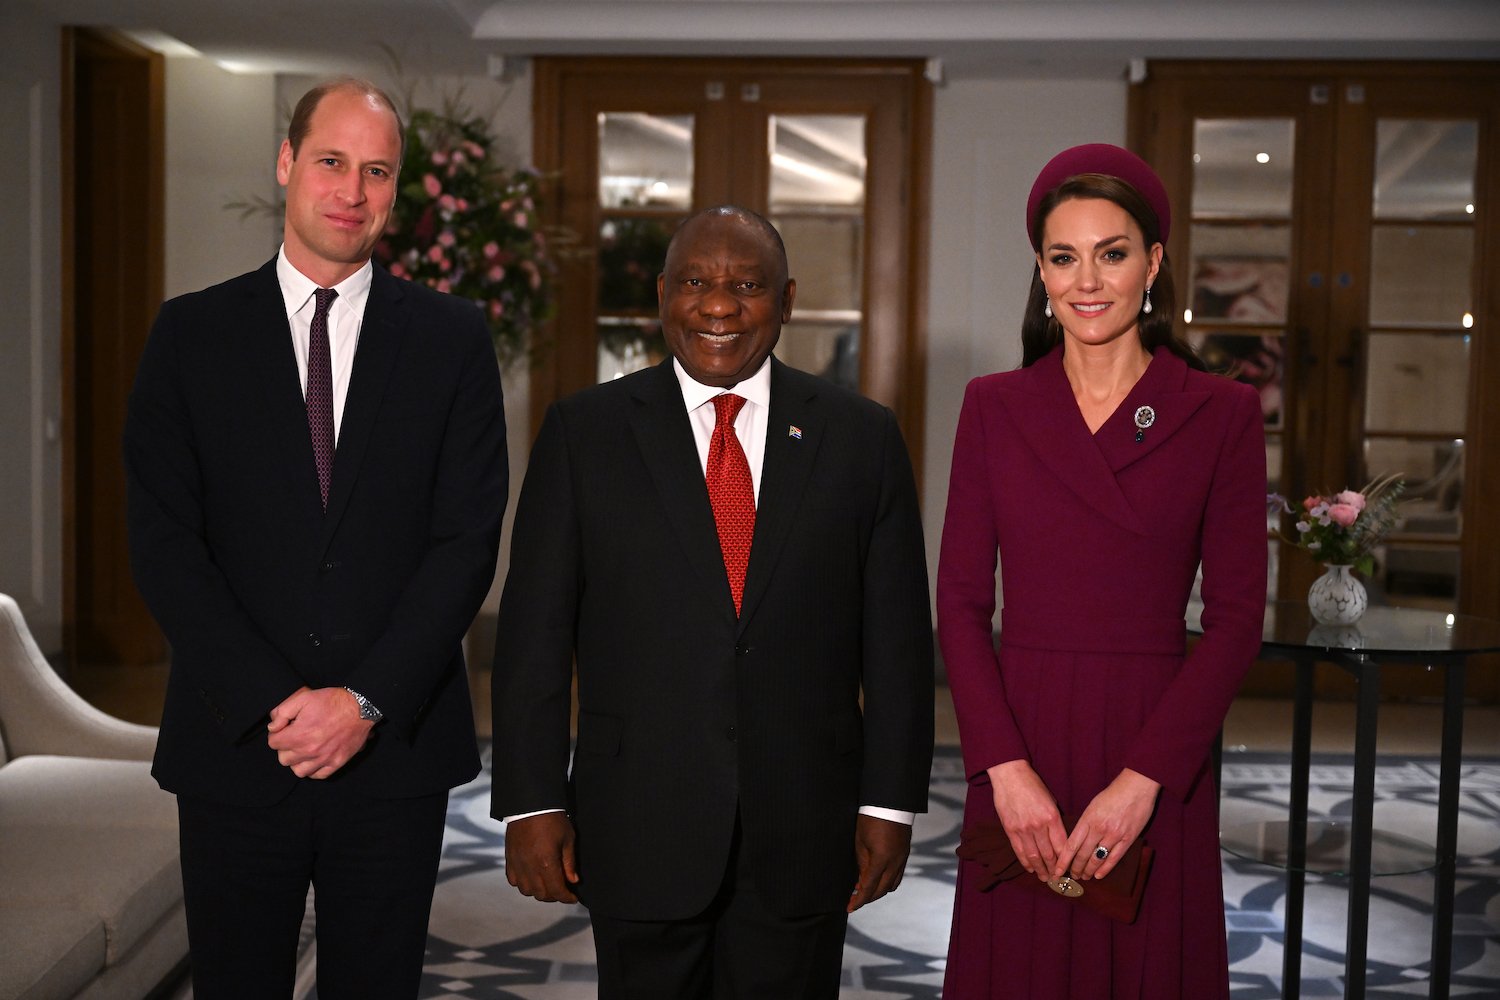 Prince William, Kate Middleton, and South Africa's President Cyril Ramaphosa body language in photo analyzed